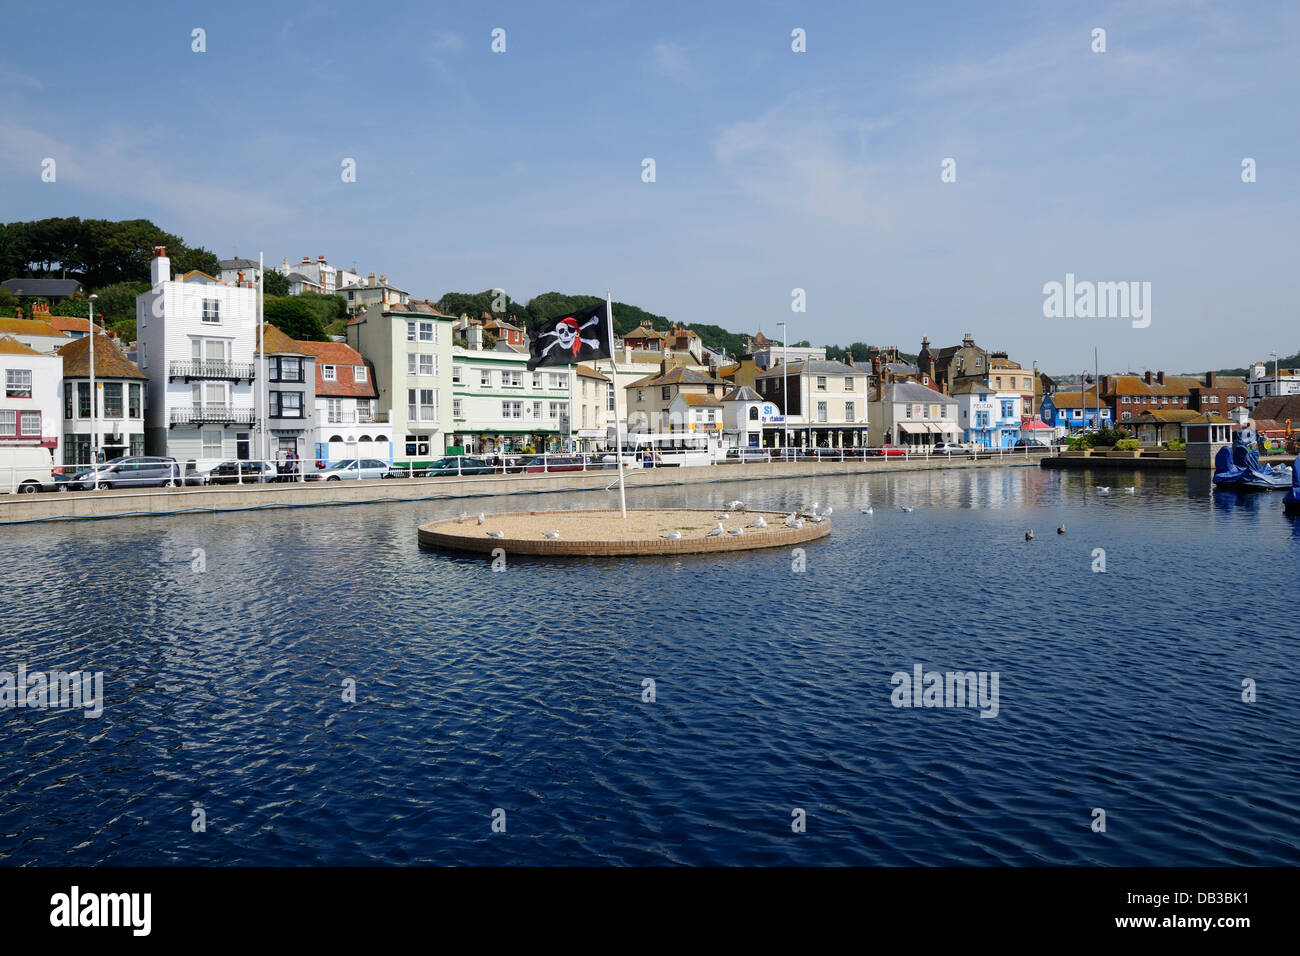 Hastings old town front, East Sussex, with boating lake Stock Photo